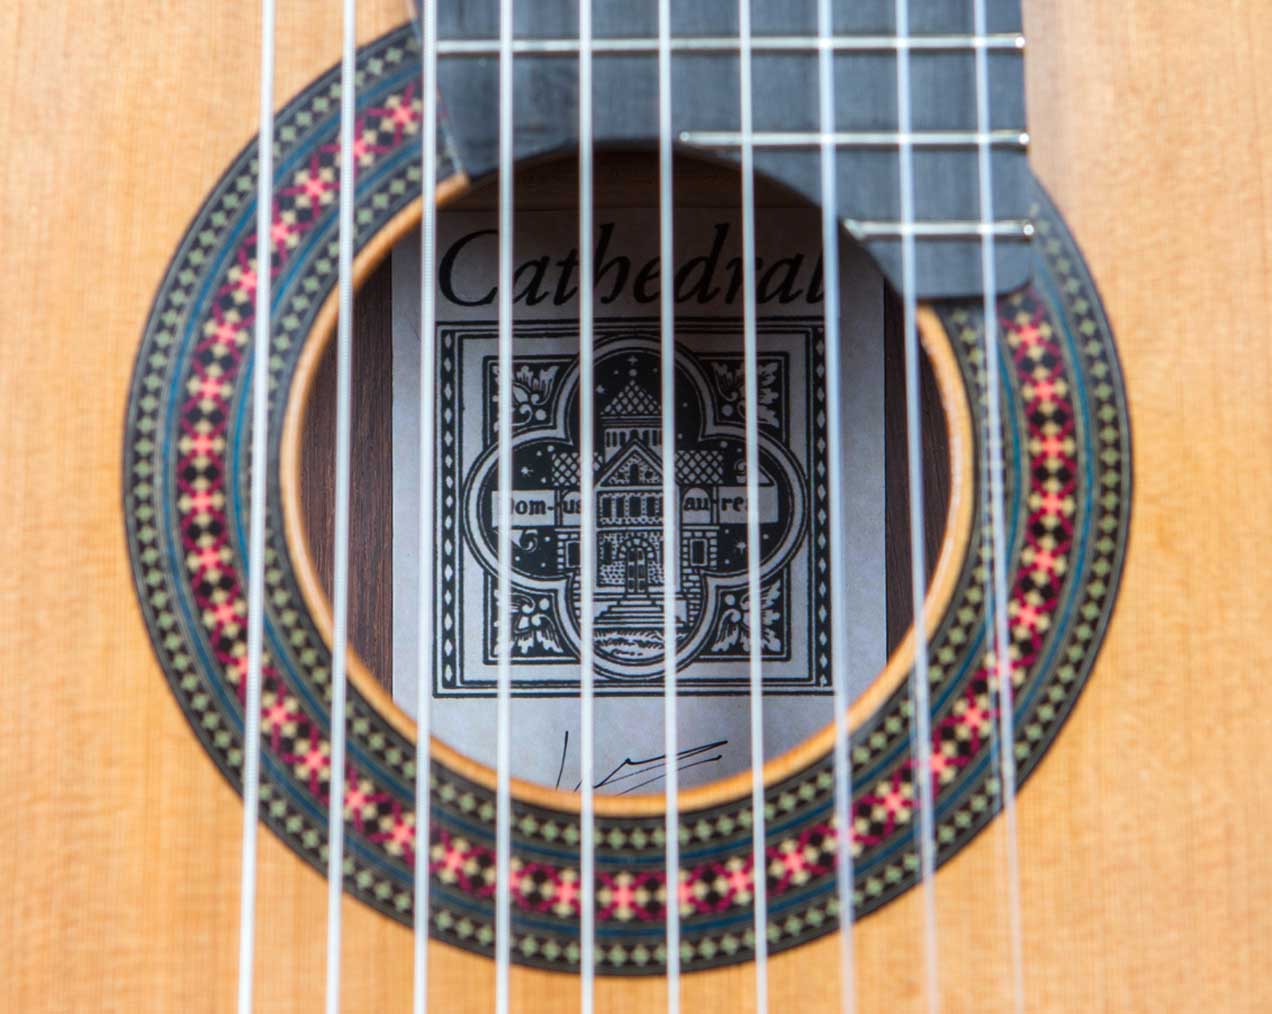 New Cathedral 40 Classical 10-String Harp Guitar in Cedar / Madagascar Rosewood, by Lucio Nunez